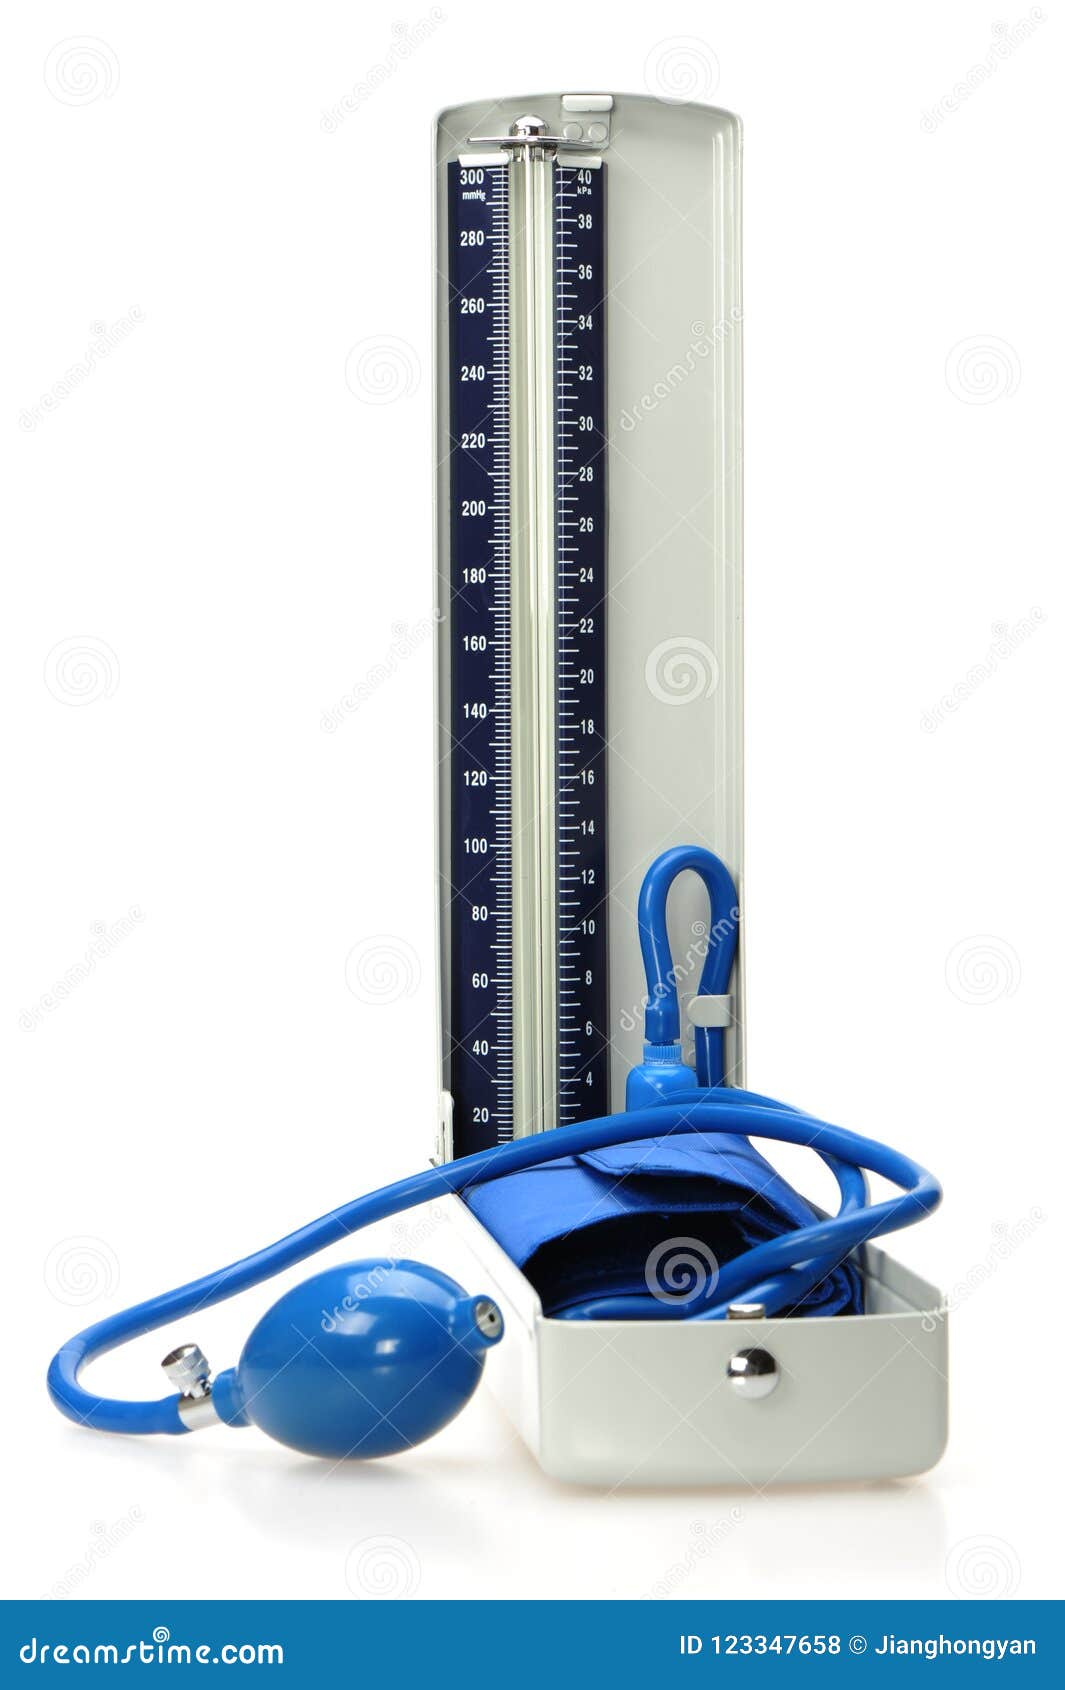 https://thumbs.dreamstime.com/z/blood-pressure-apparatus-isolated-white-background-blood-pressure-apparatus-123347658.jpg